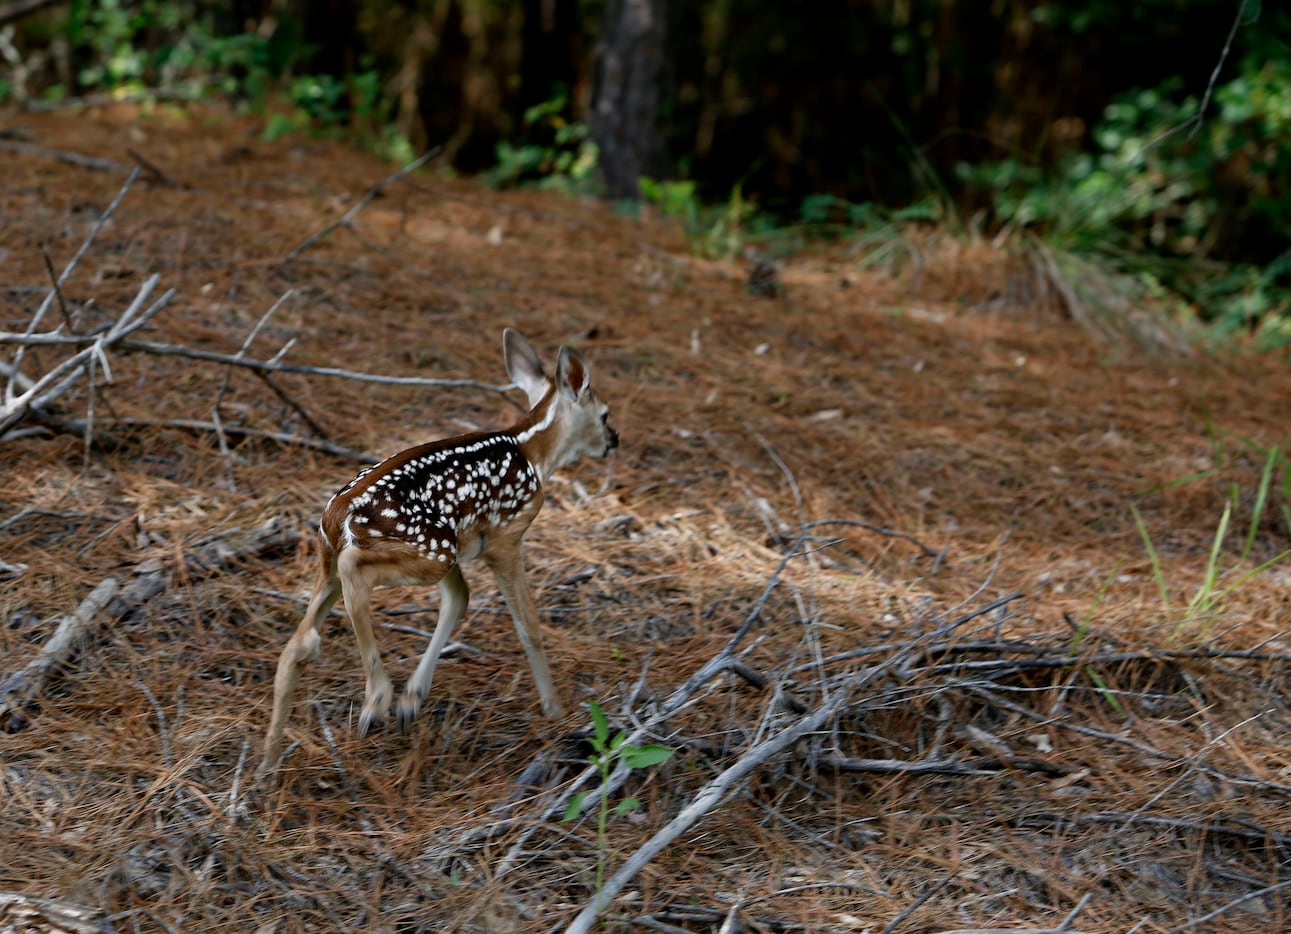 On wobbly legs, a newborn whitetail fawn heads for the woods after its mother bolted across...